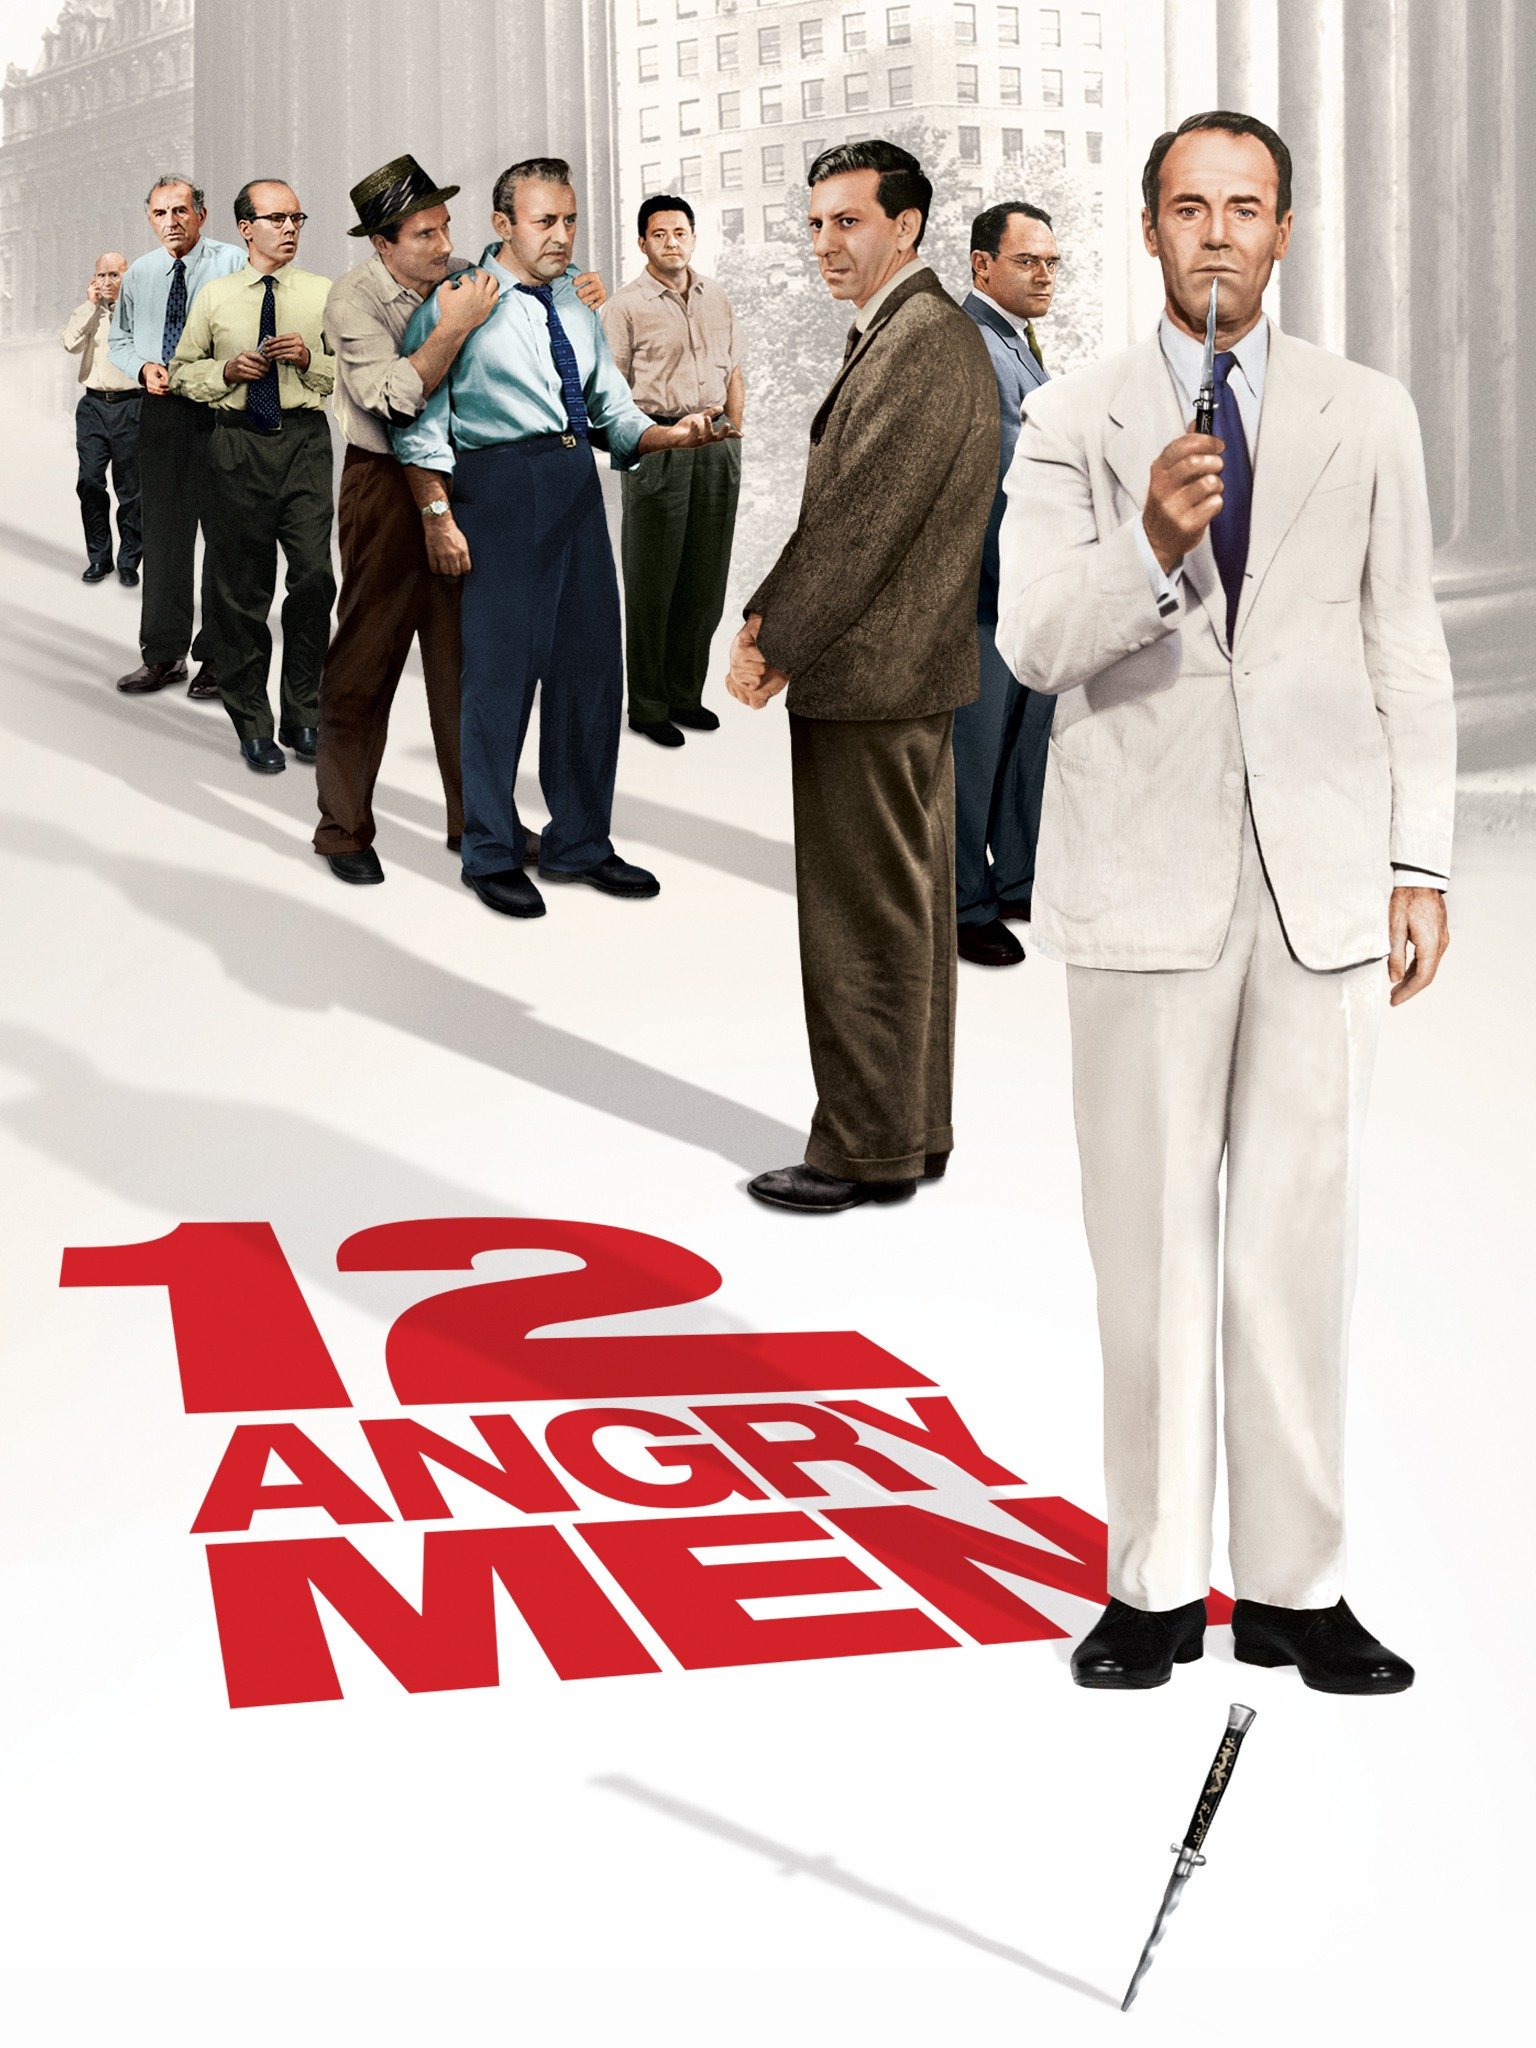 12 Angry Men - Rotten Tomatoes